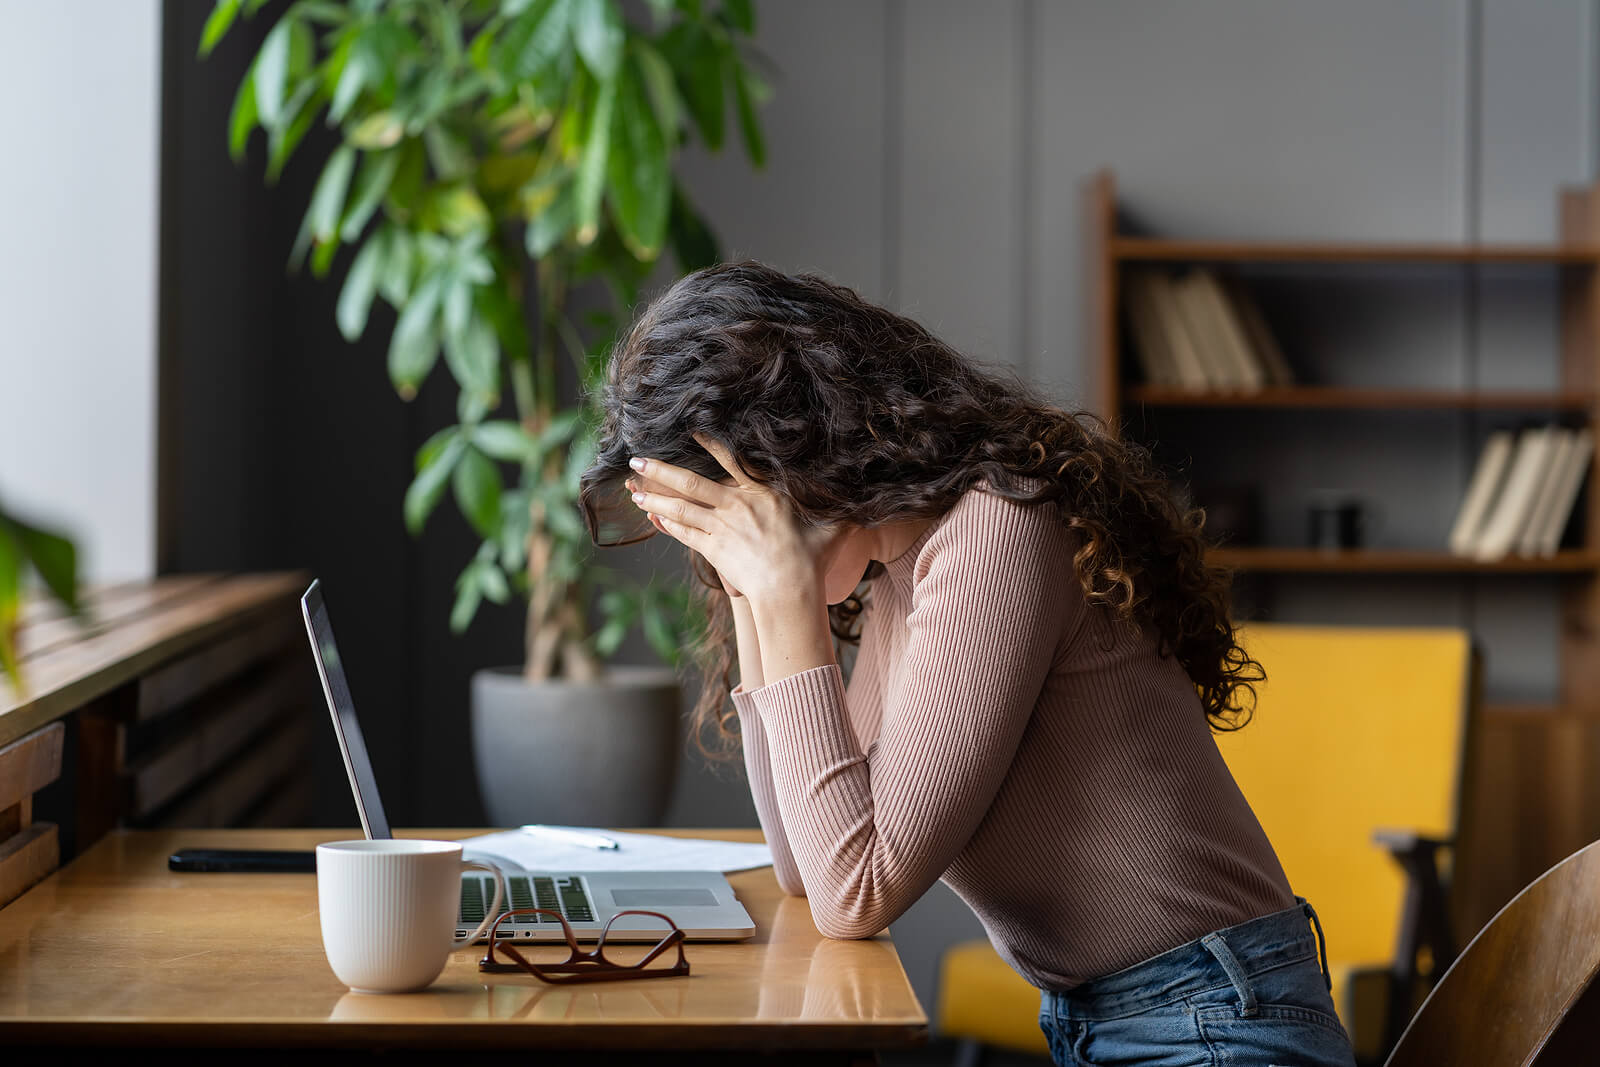 A woman touches her head while sitting at a computer desk. This could represent the stress of high functioning anxiety that anxiety treatment in American Fork, UT can help address. Learn more about anxiety counseling American Fork, UT by contacting an anxiety therapist American Fork, UT today.